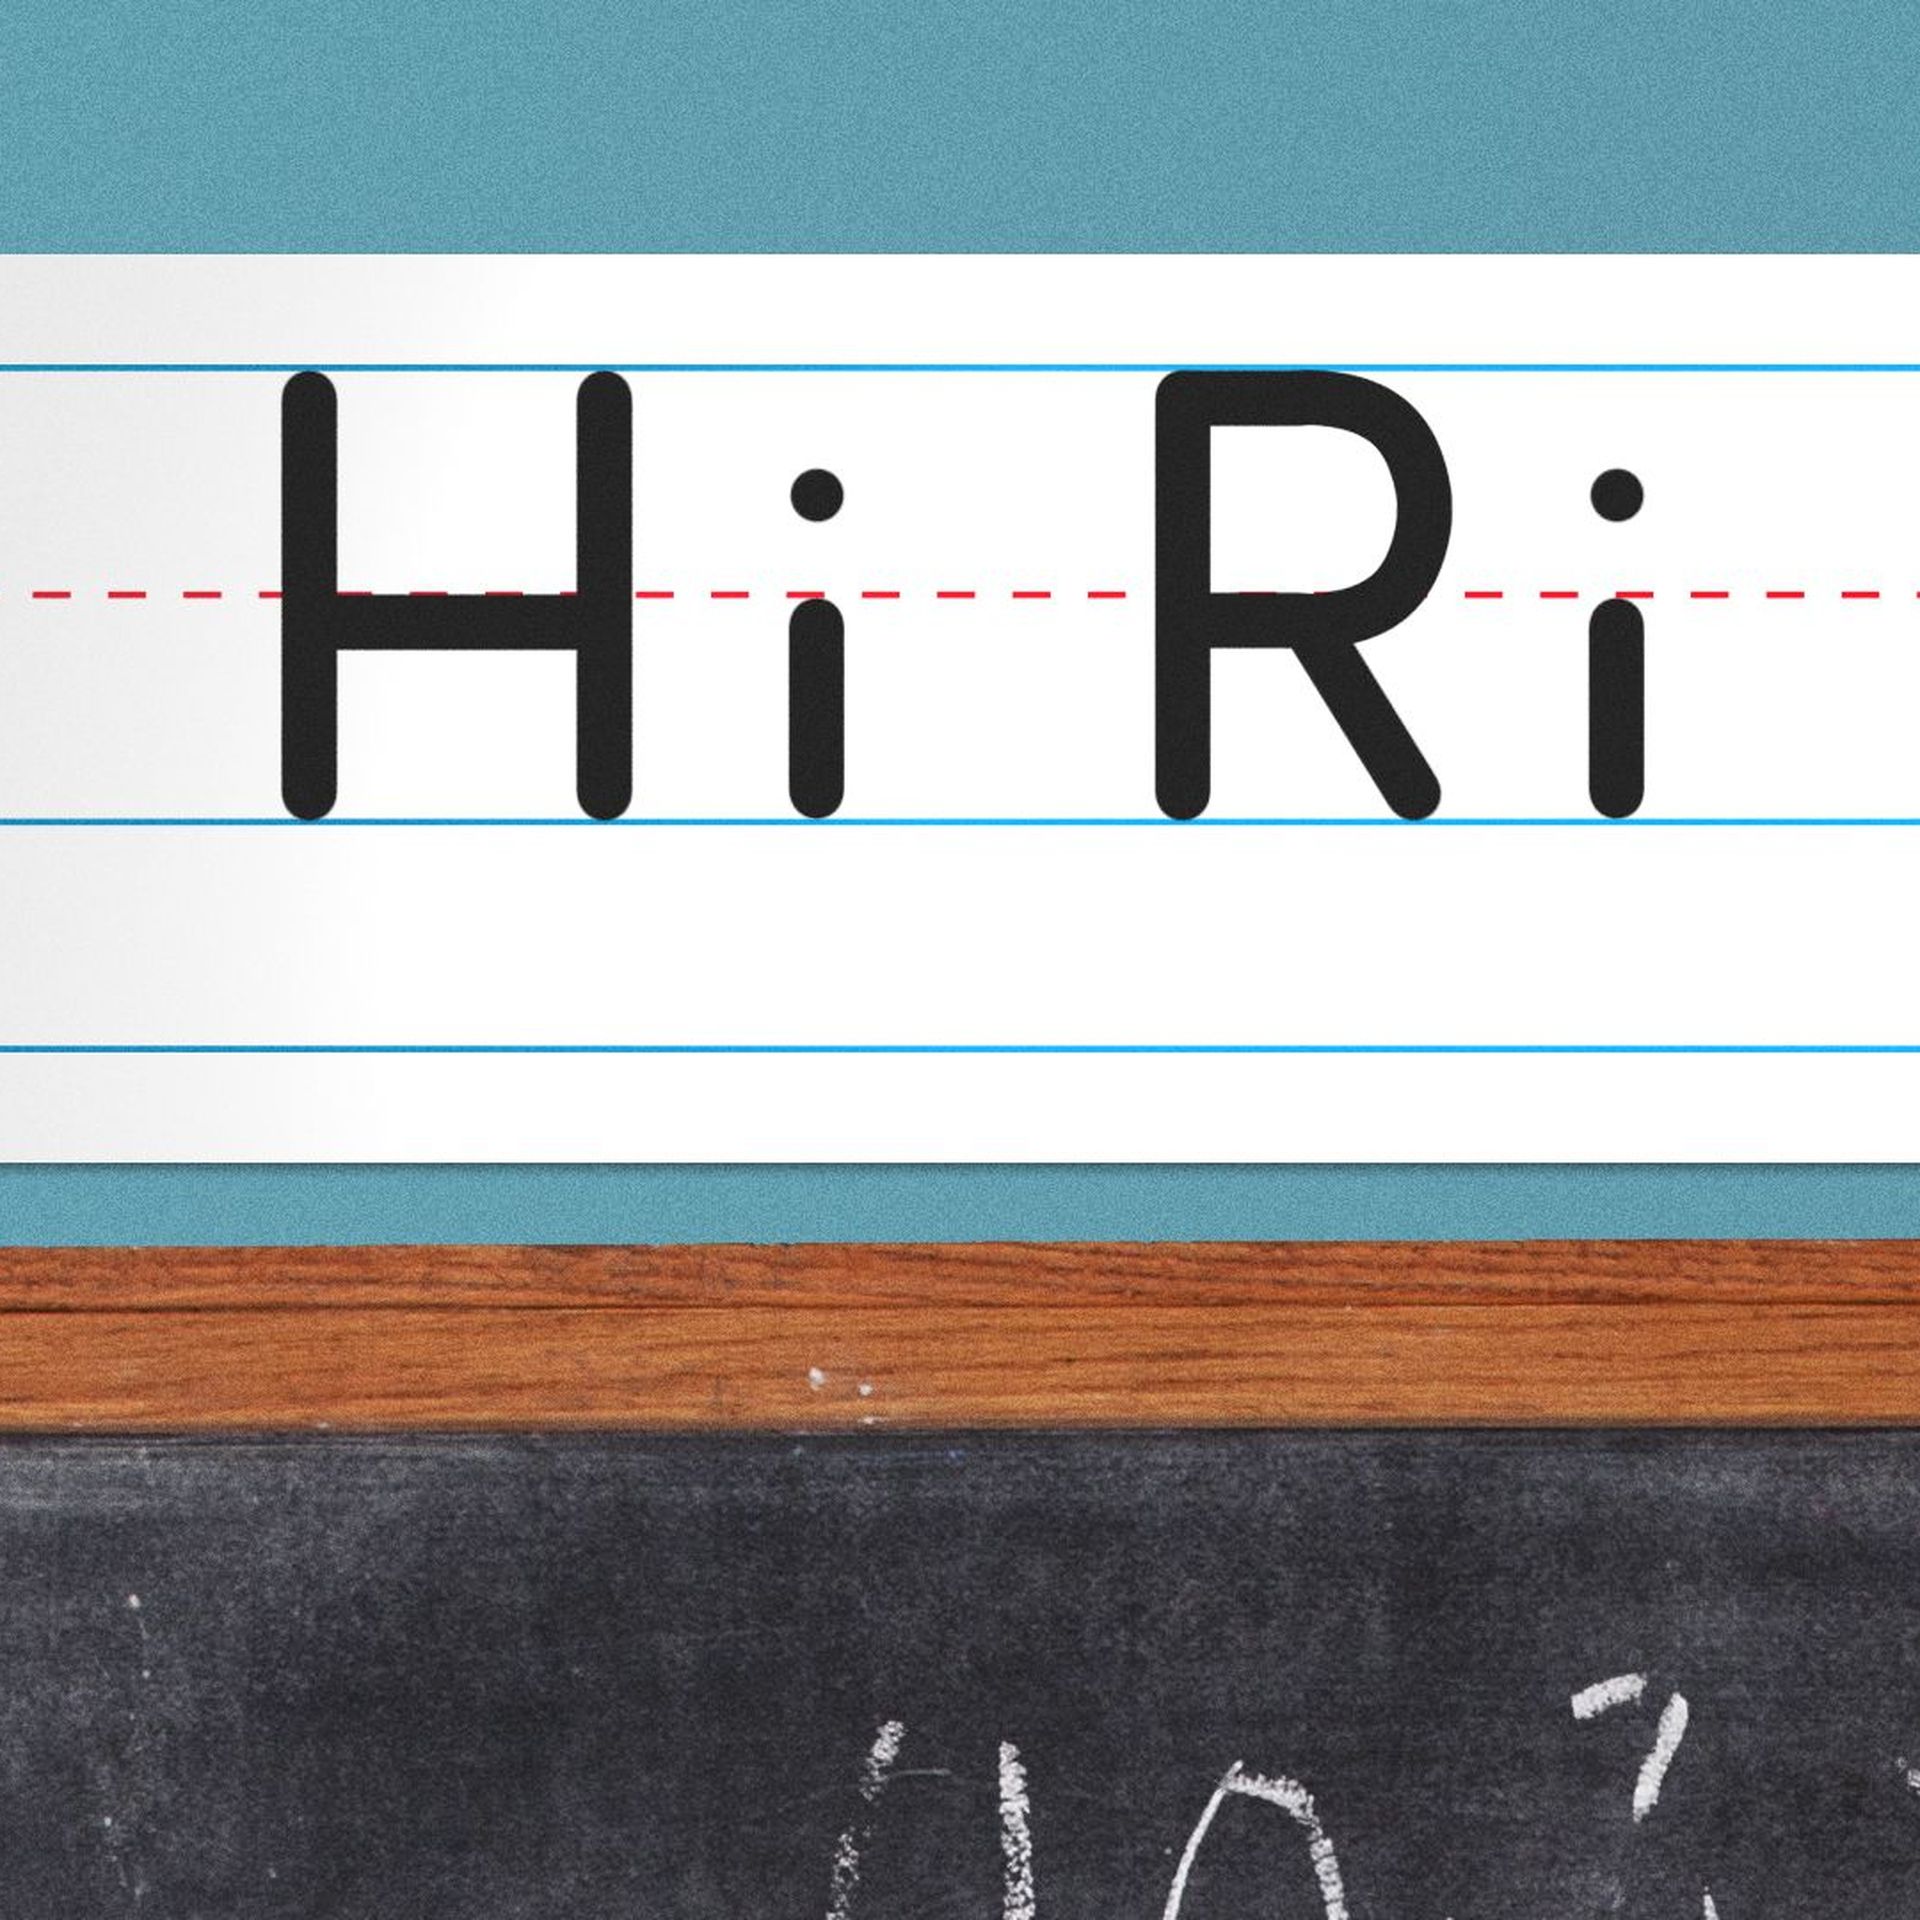 Illustration of a handwriting alphabet above the chalkboard spells out "Hiring."